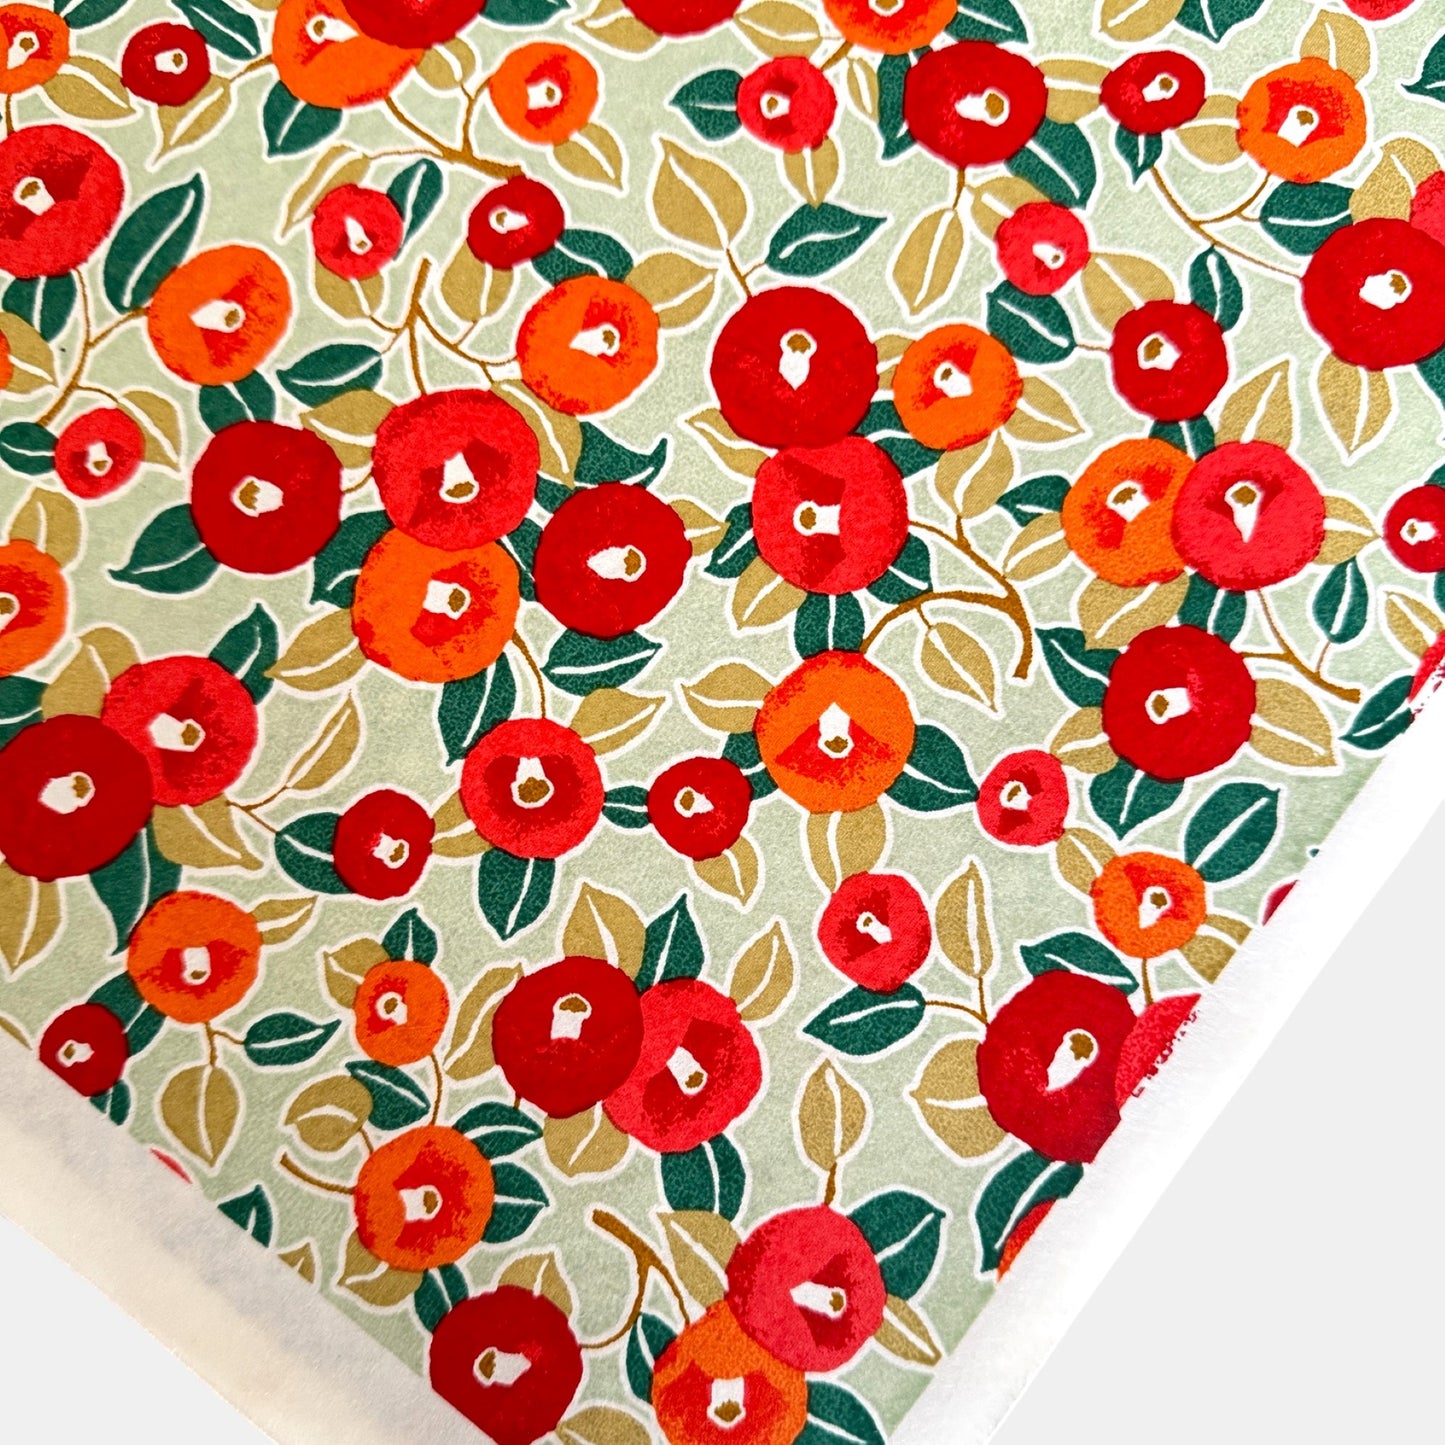 Japanese silkscreen chiyogami paper with a repeat pattern of camellia flowers in red and orange on a soft green ground